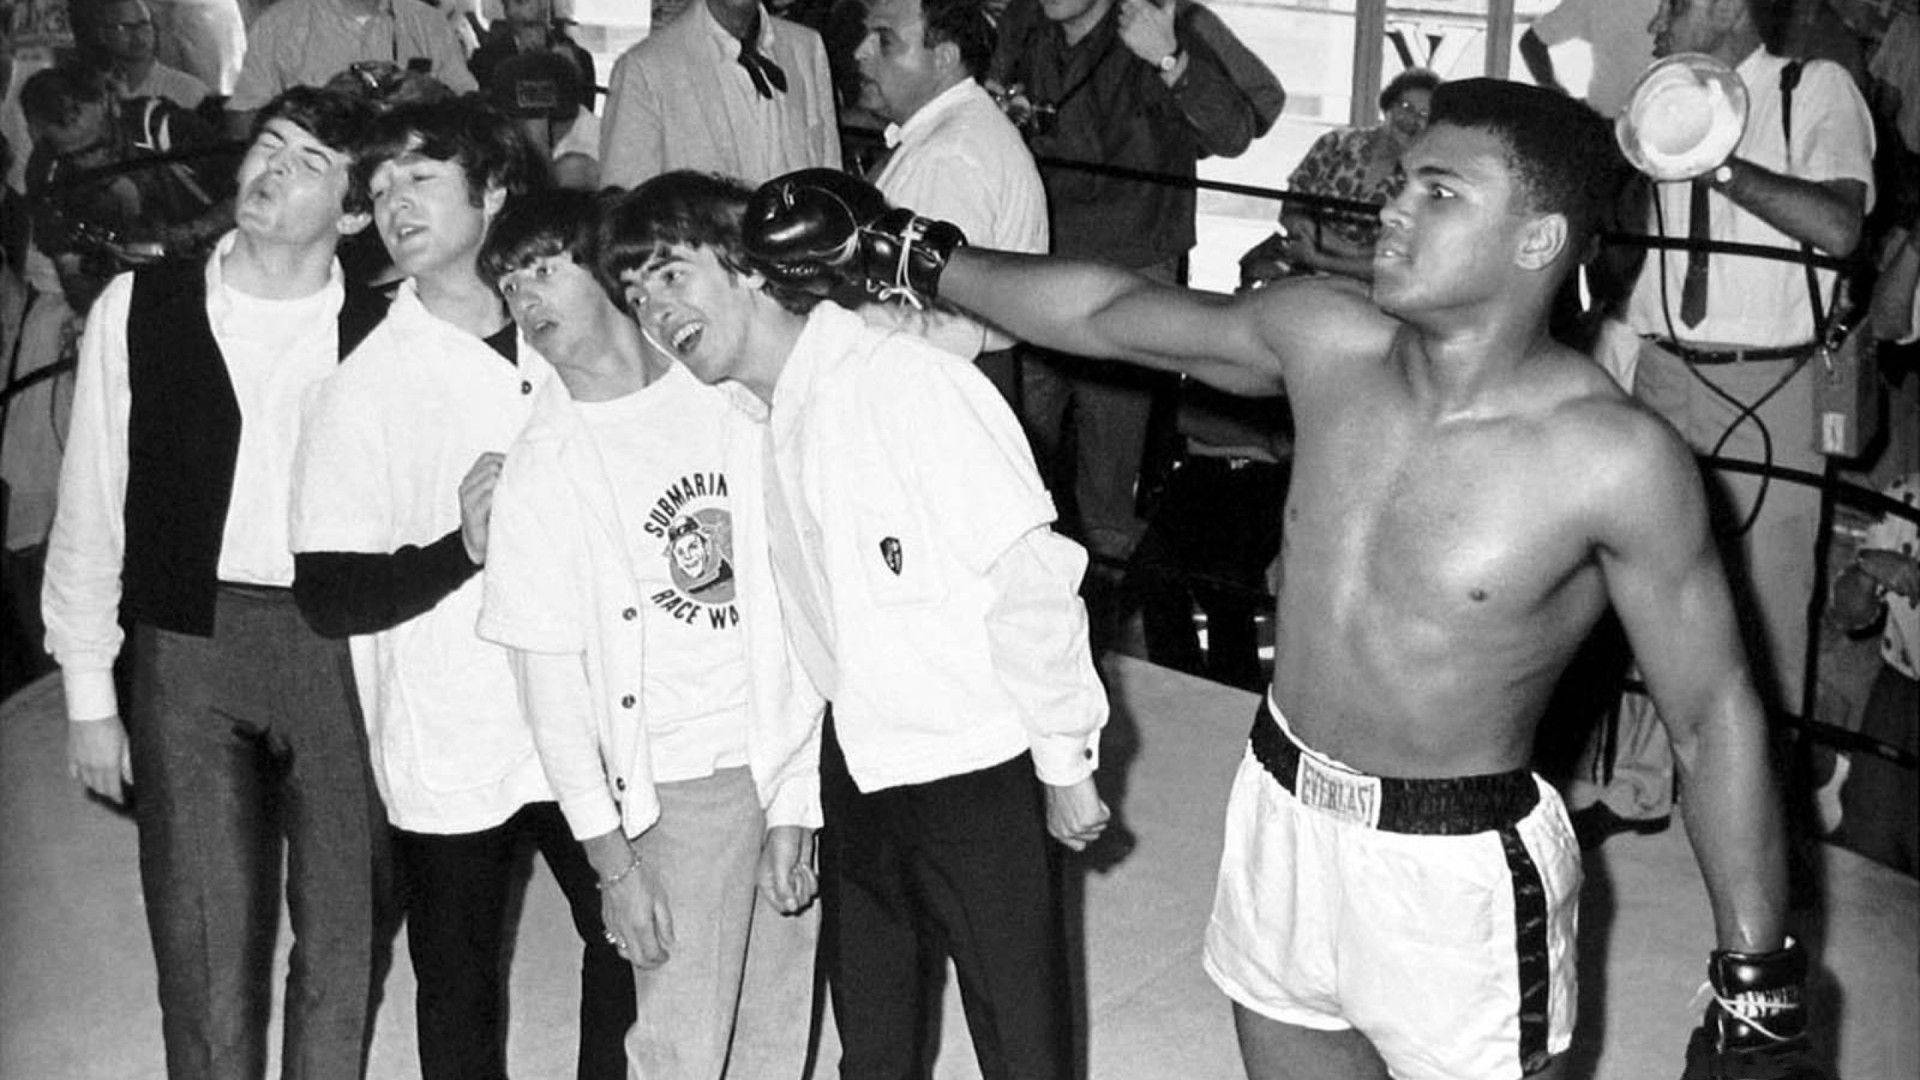 Legends Unite! - Muhammad Ali Poses with the Beatles Wallpaper